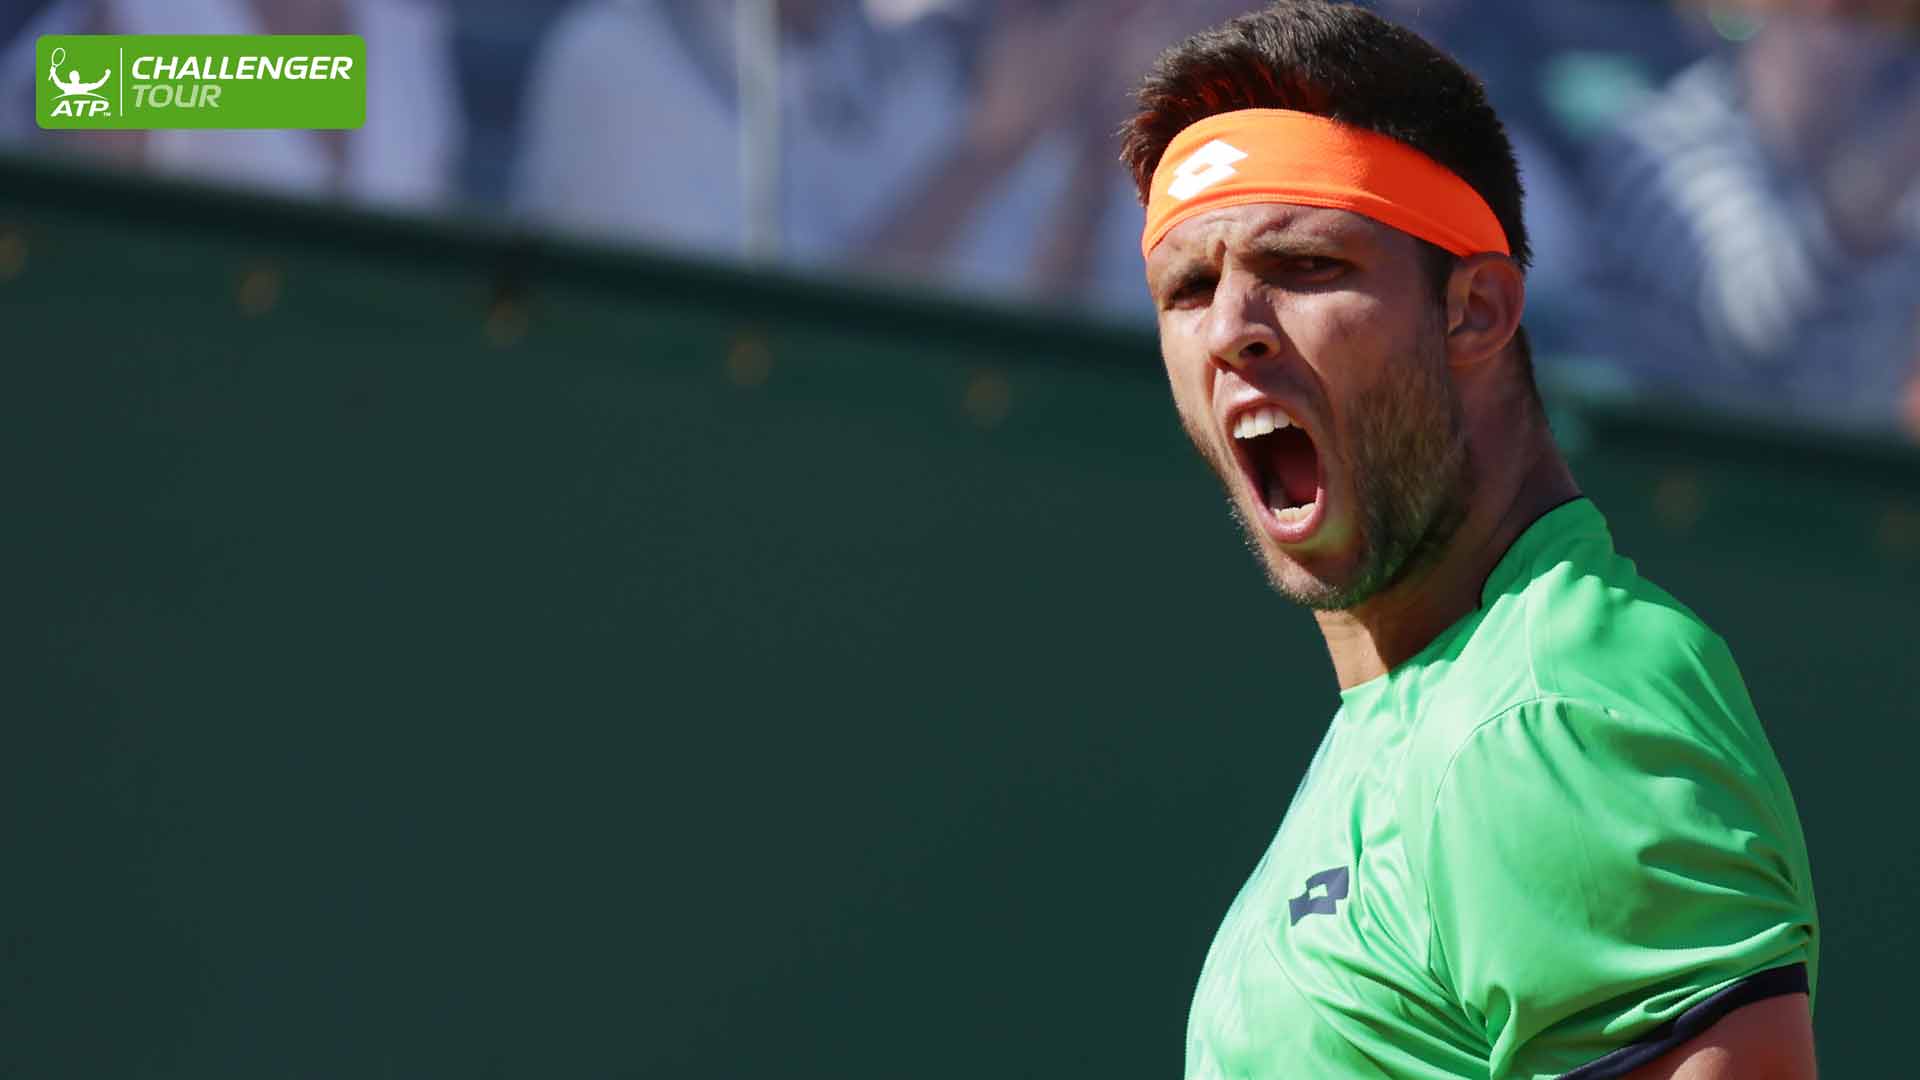 Jiri Vesely is balancing Challengers with ATP World Tour events in 2016.